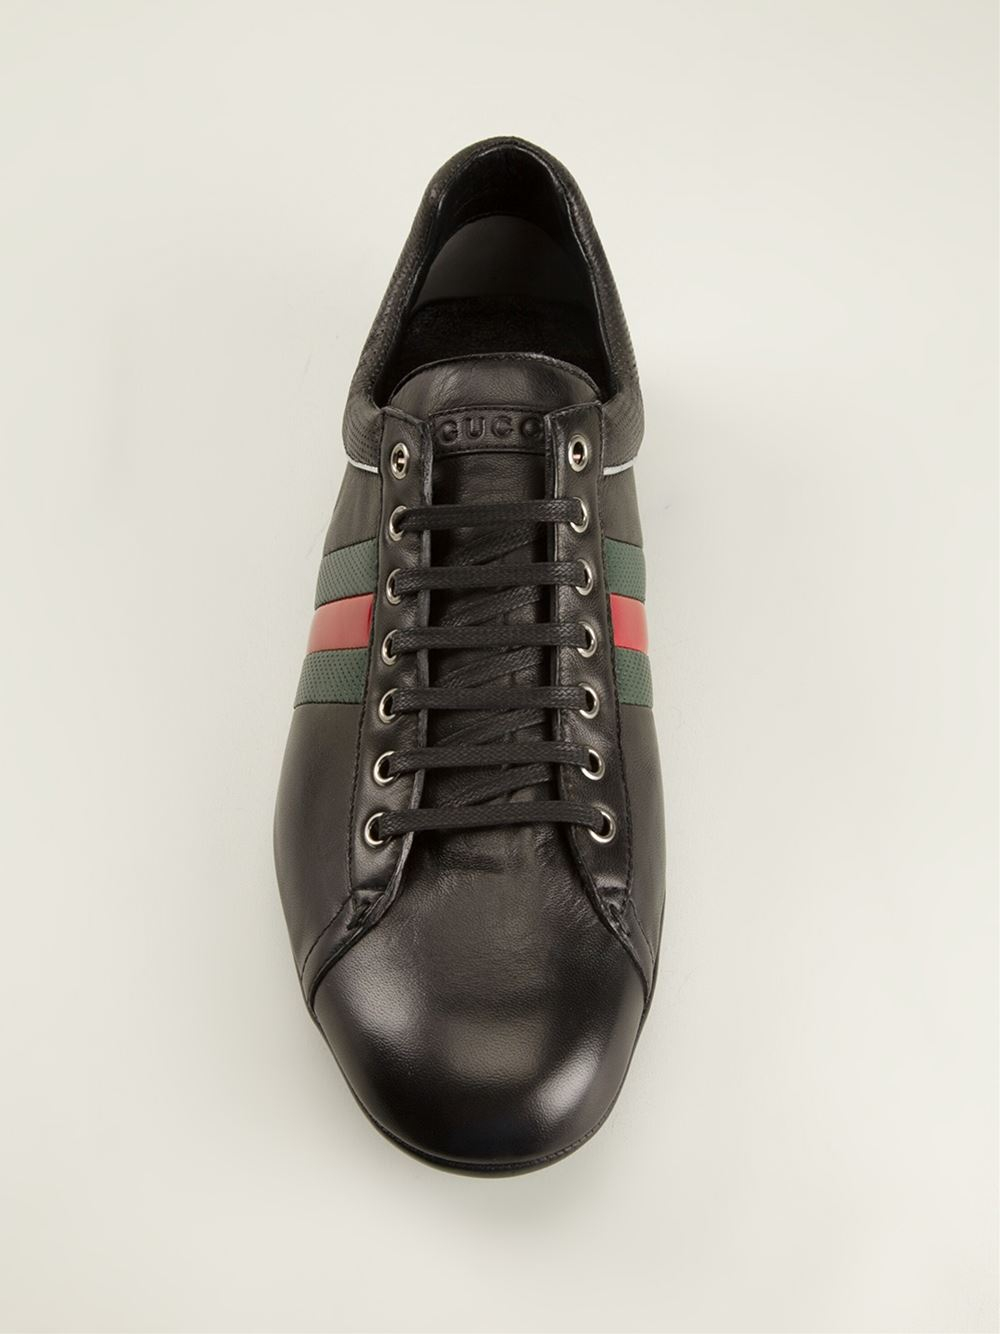 Gucci Classic Lo-top Sneakers in Black for Men - Lyst